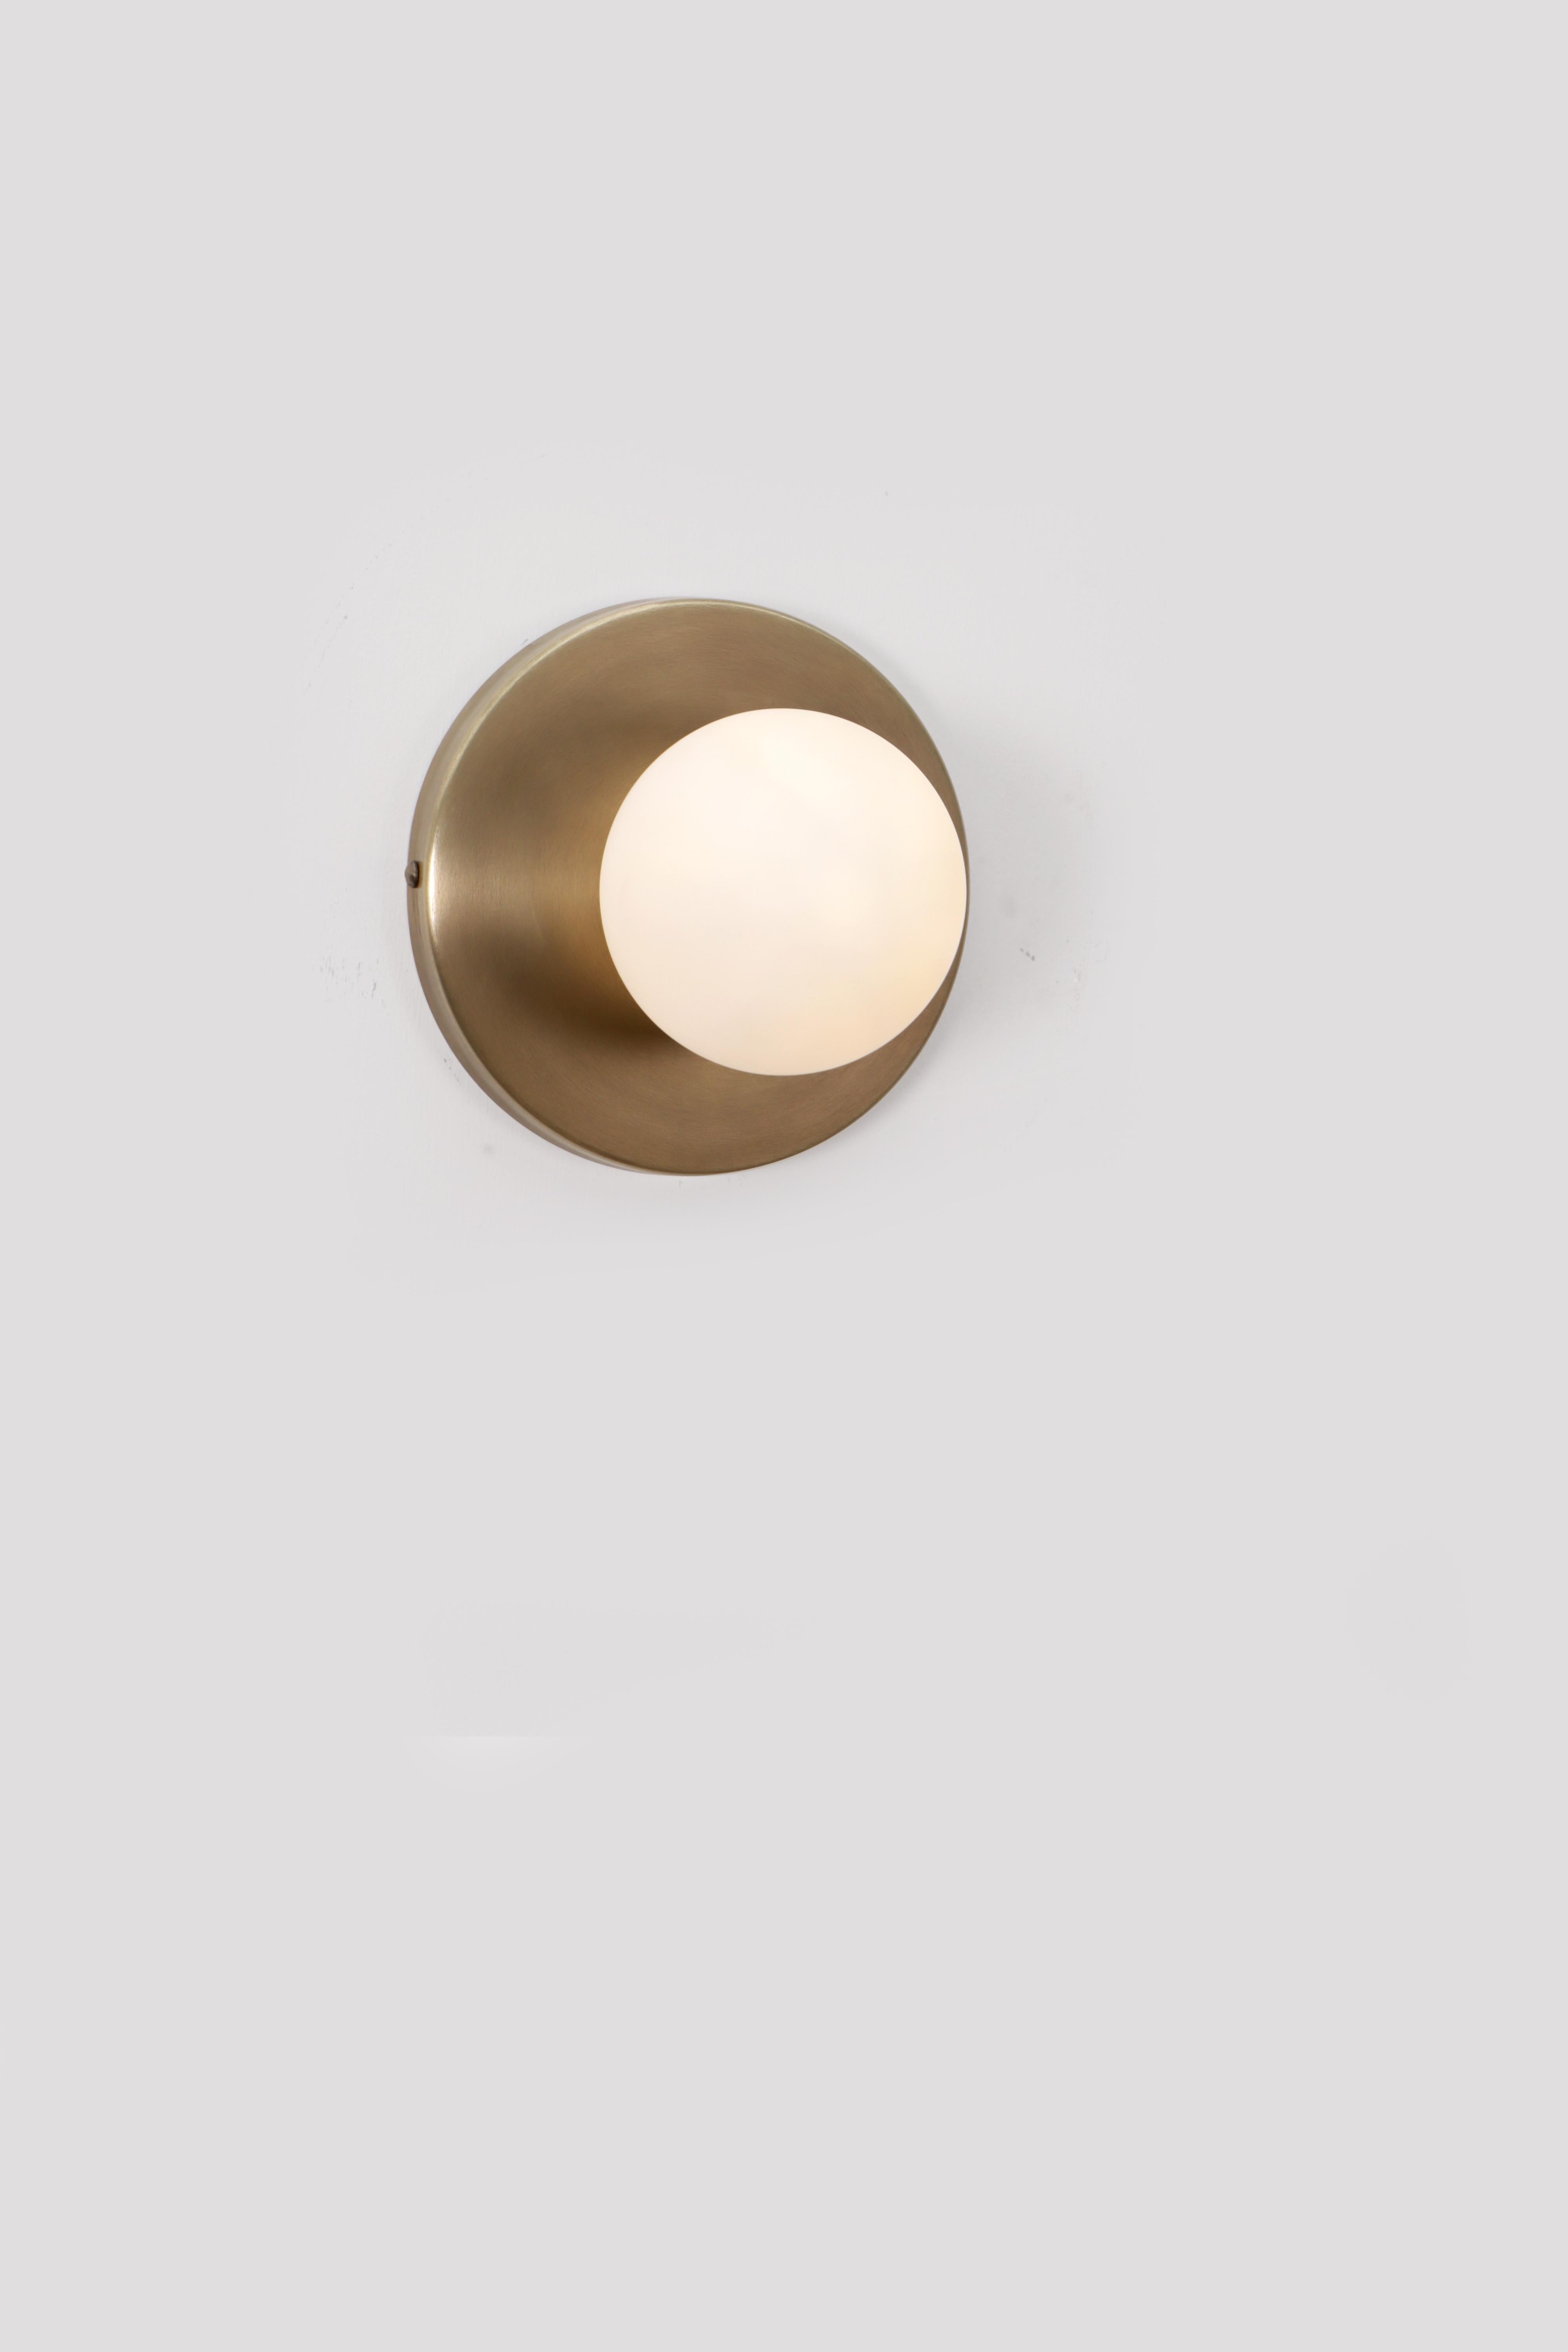 Dew Brass Dome Small Wall Sconce by Lamp Shaper
Dimensions: D 14 x W 16.5 x H 16.5 cm.
Materials: Brass.

Different finishes available: raw brass, aged brass, burnt brass and brushed brass Please contact us.

All our lamps can be wired according to